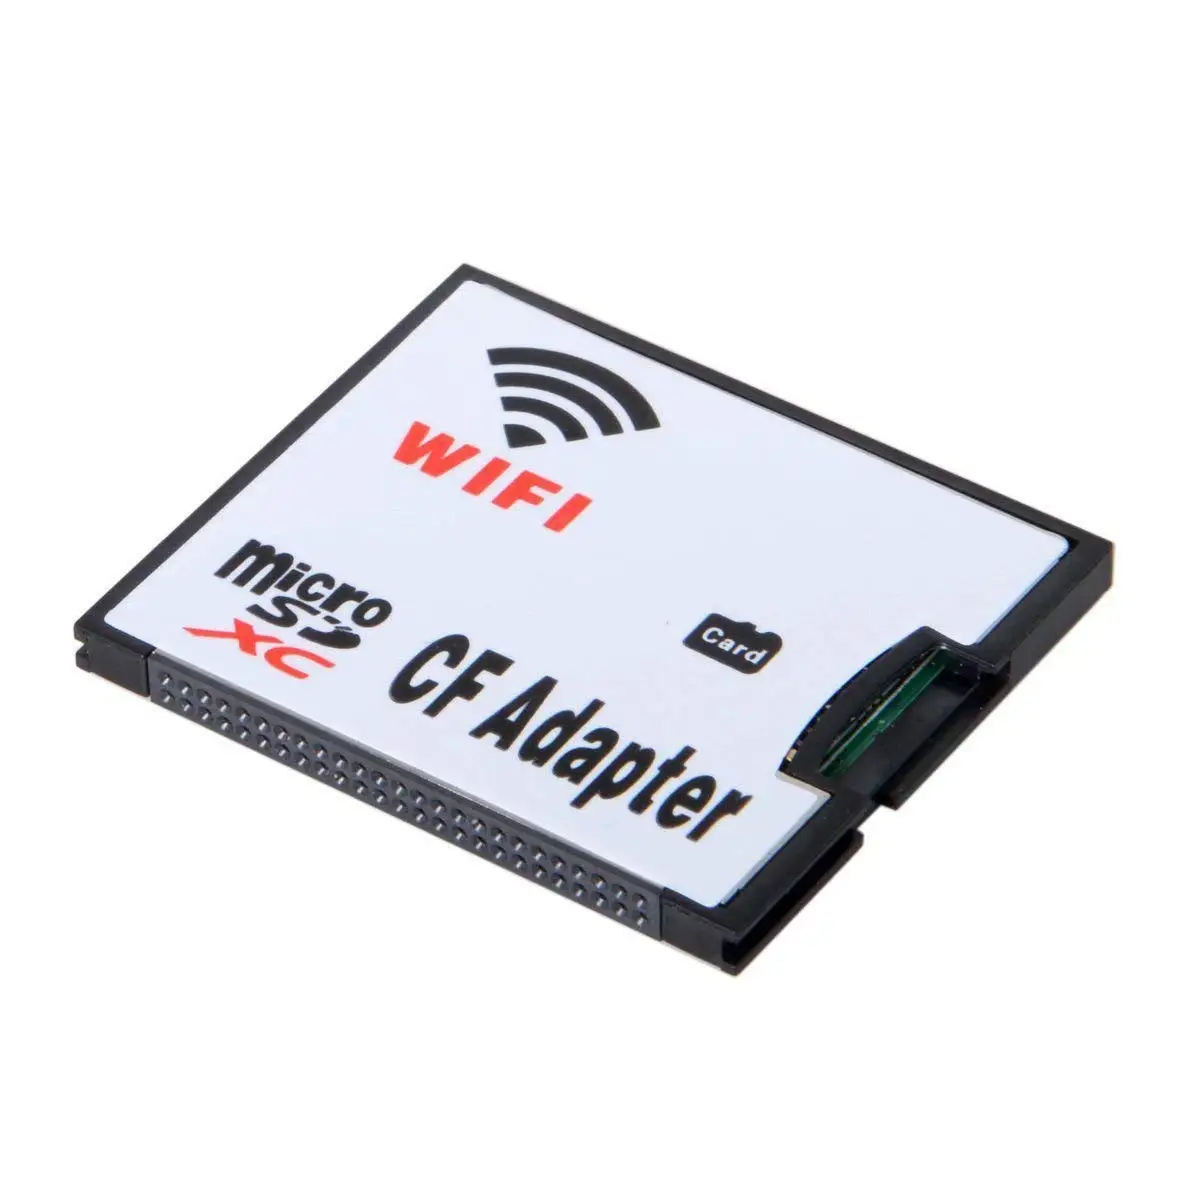 Cheap Wii Wifi Card Find Wii Wifi Card Deals On Line At Alibaba Com